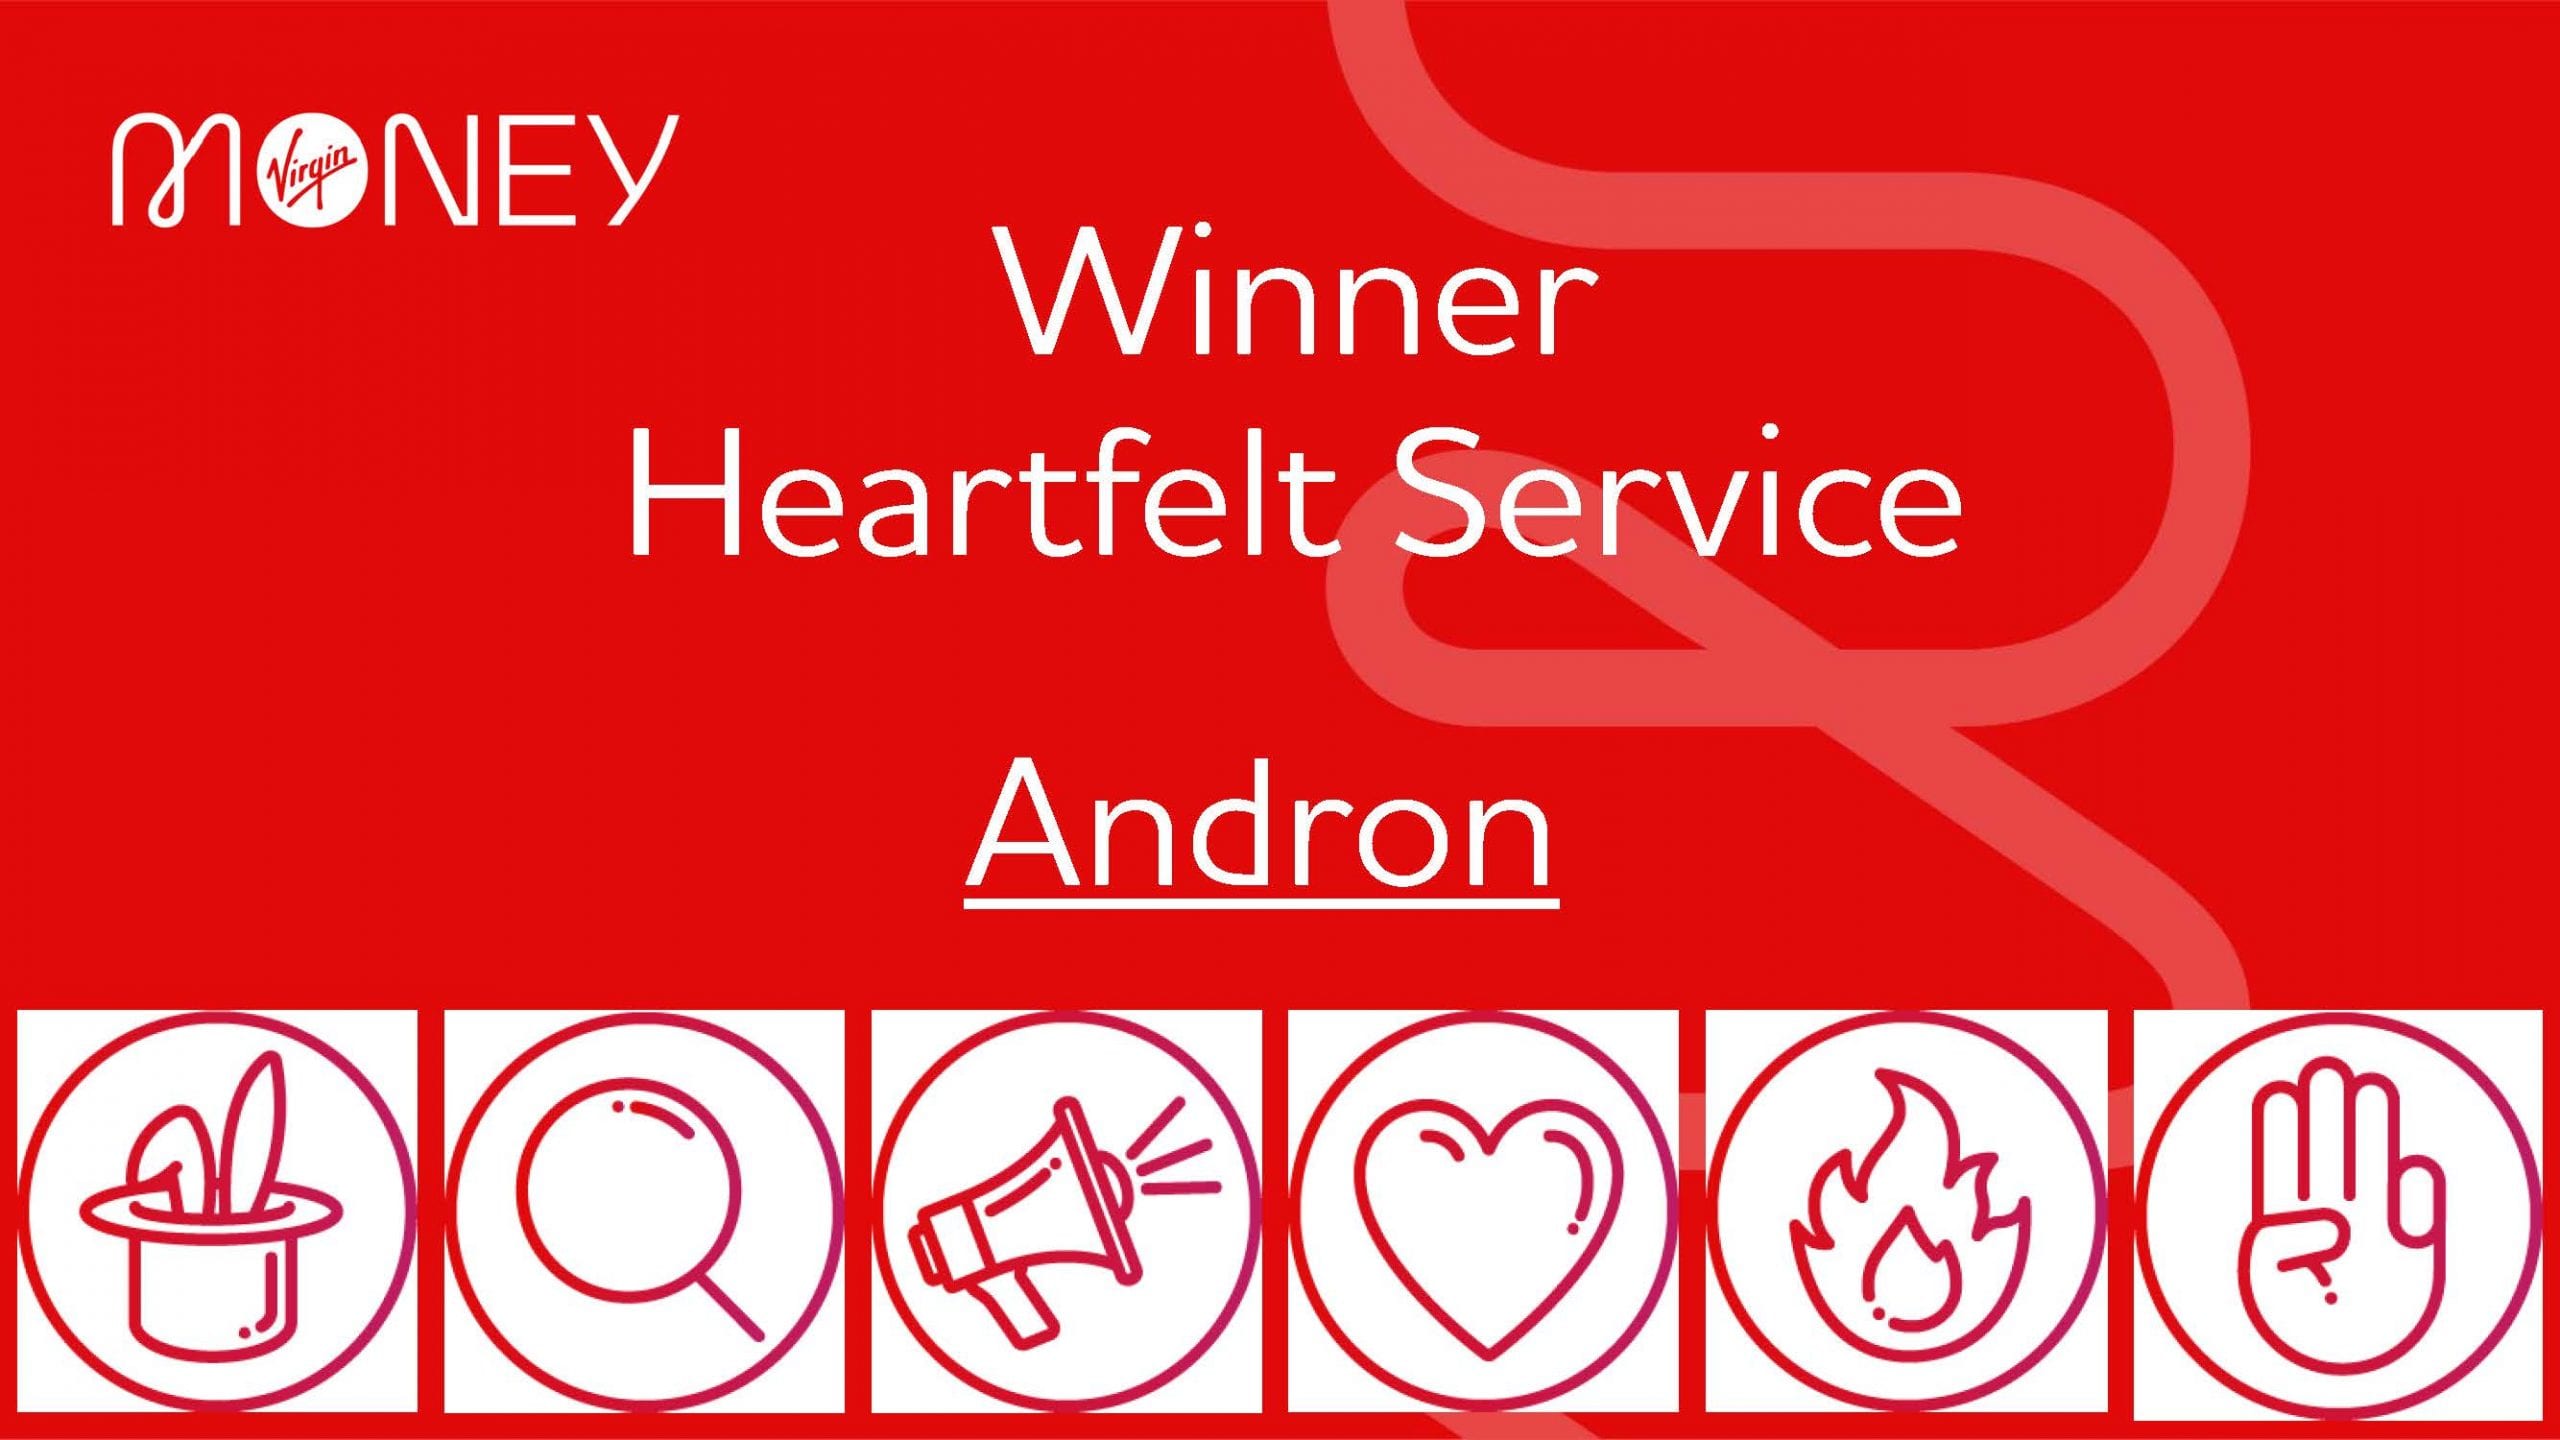 Andron certificate for heartfelt service award